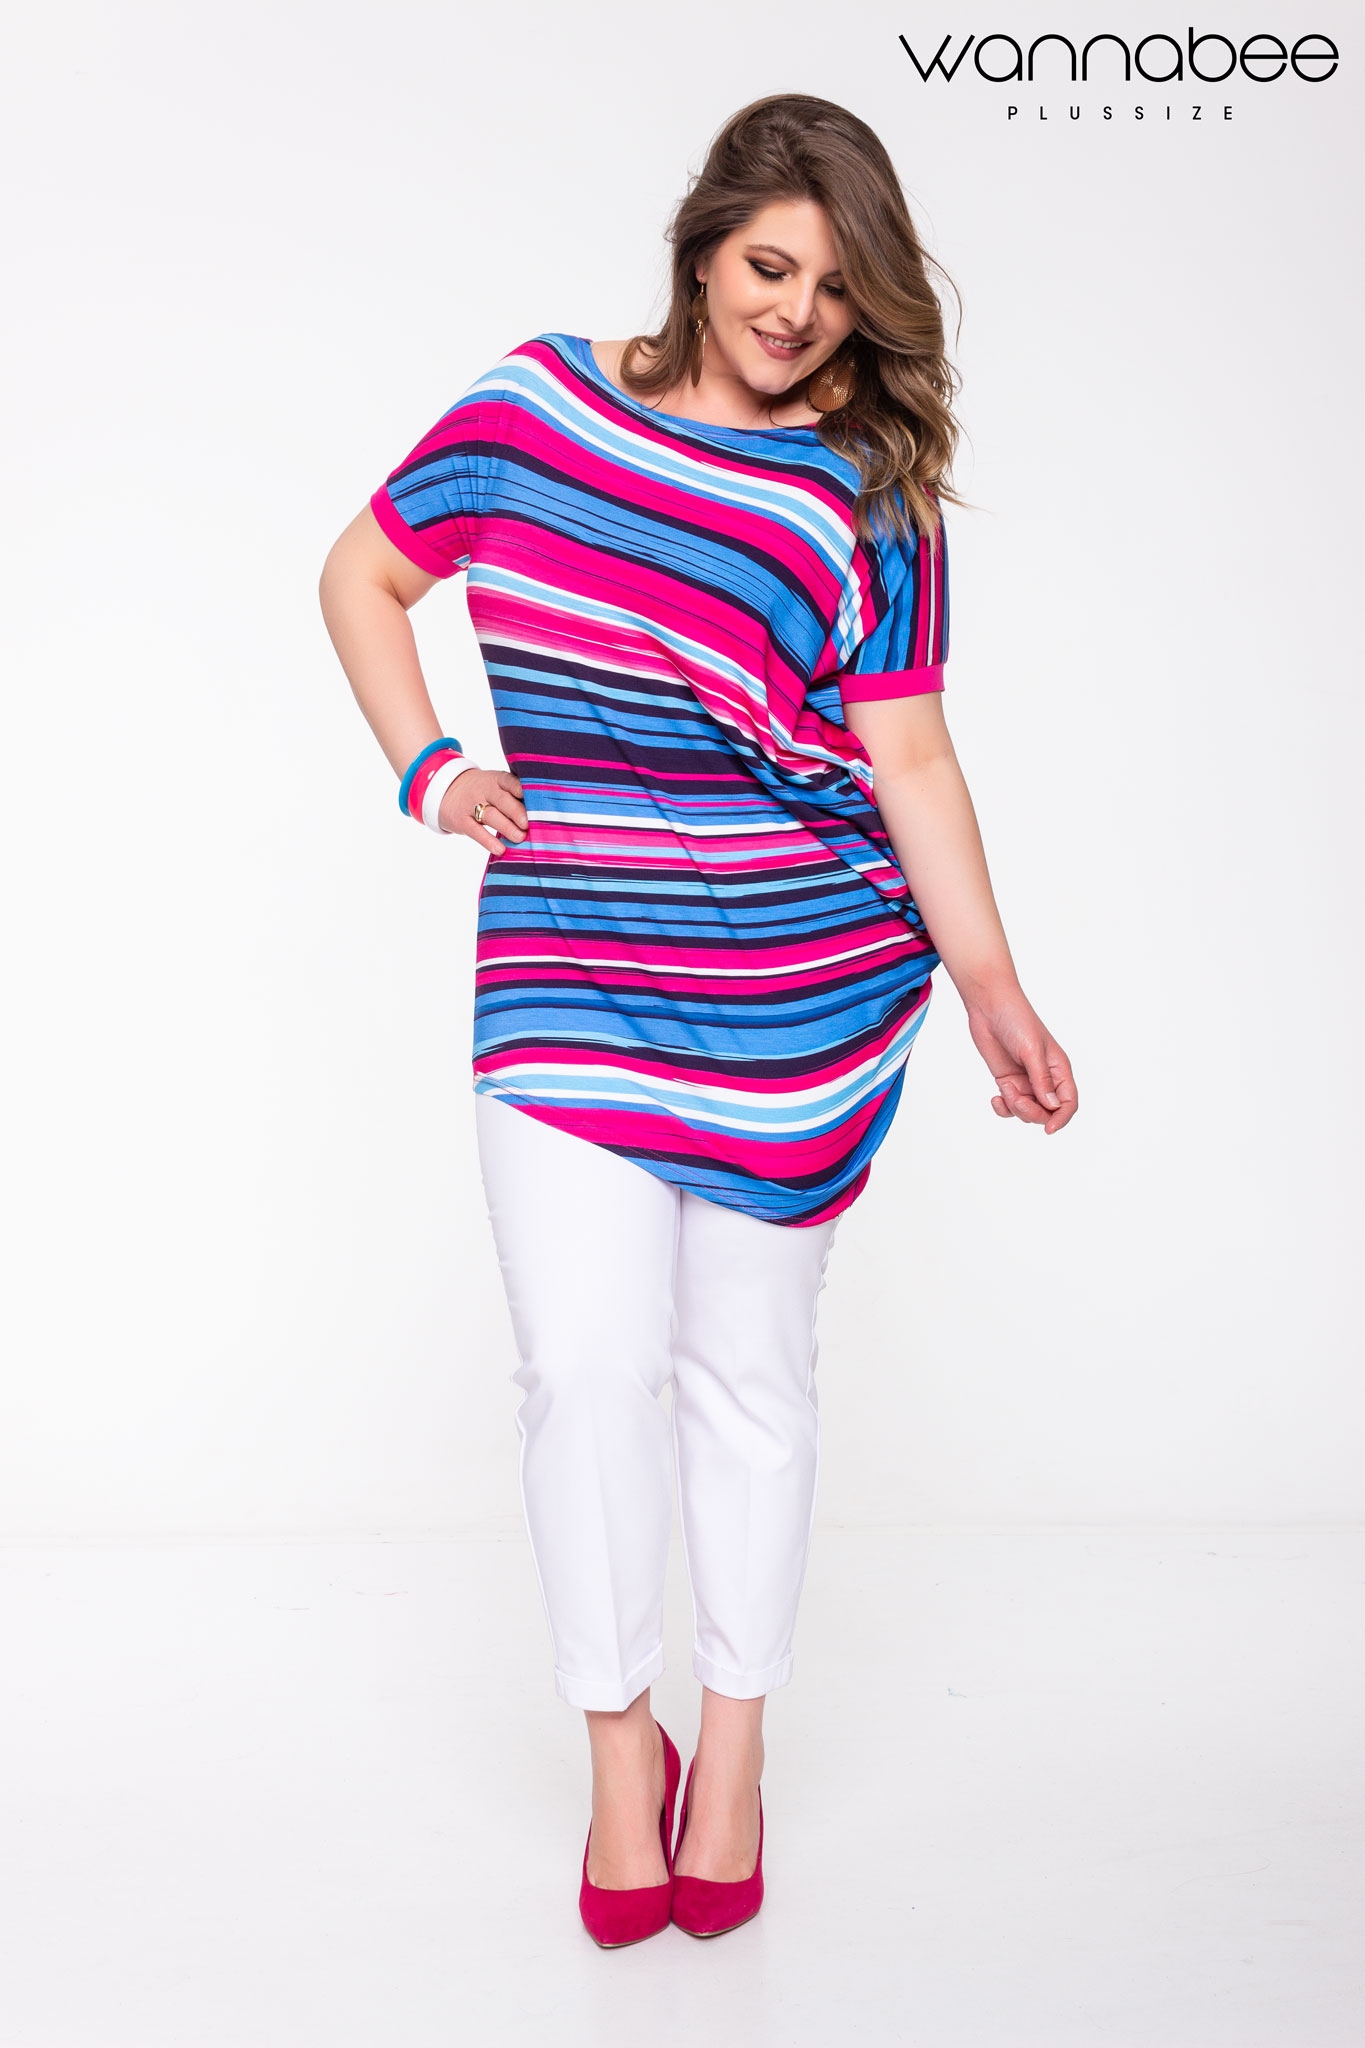 casual nőies outfit, plus size fashion, Wannabee plus size webshop